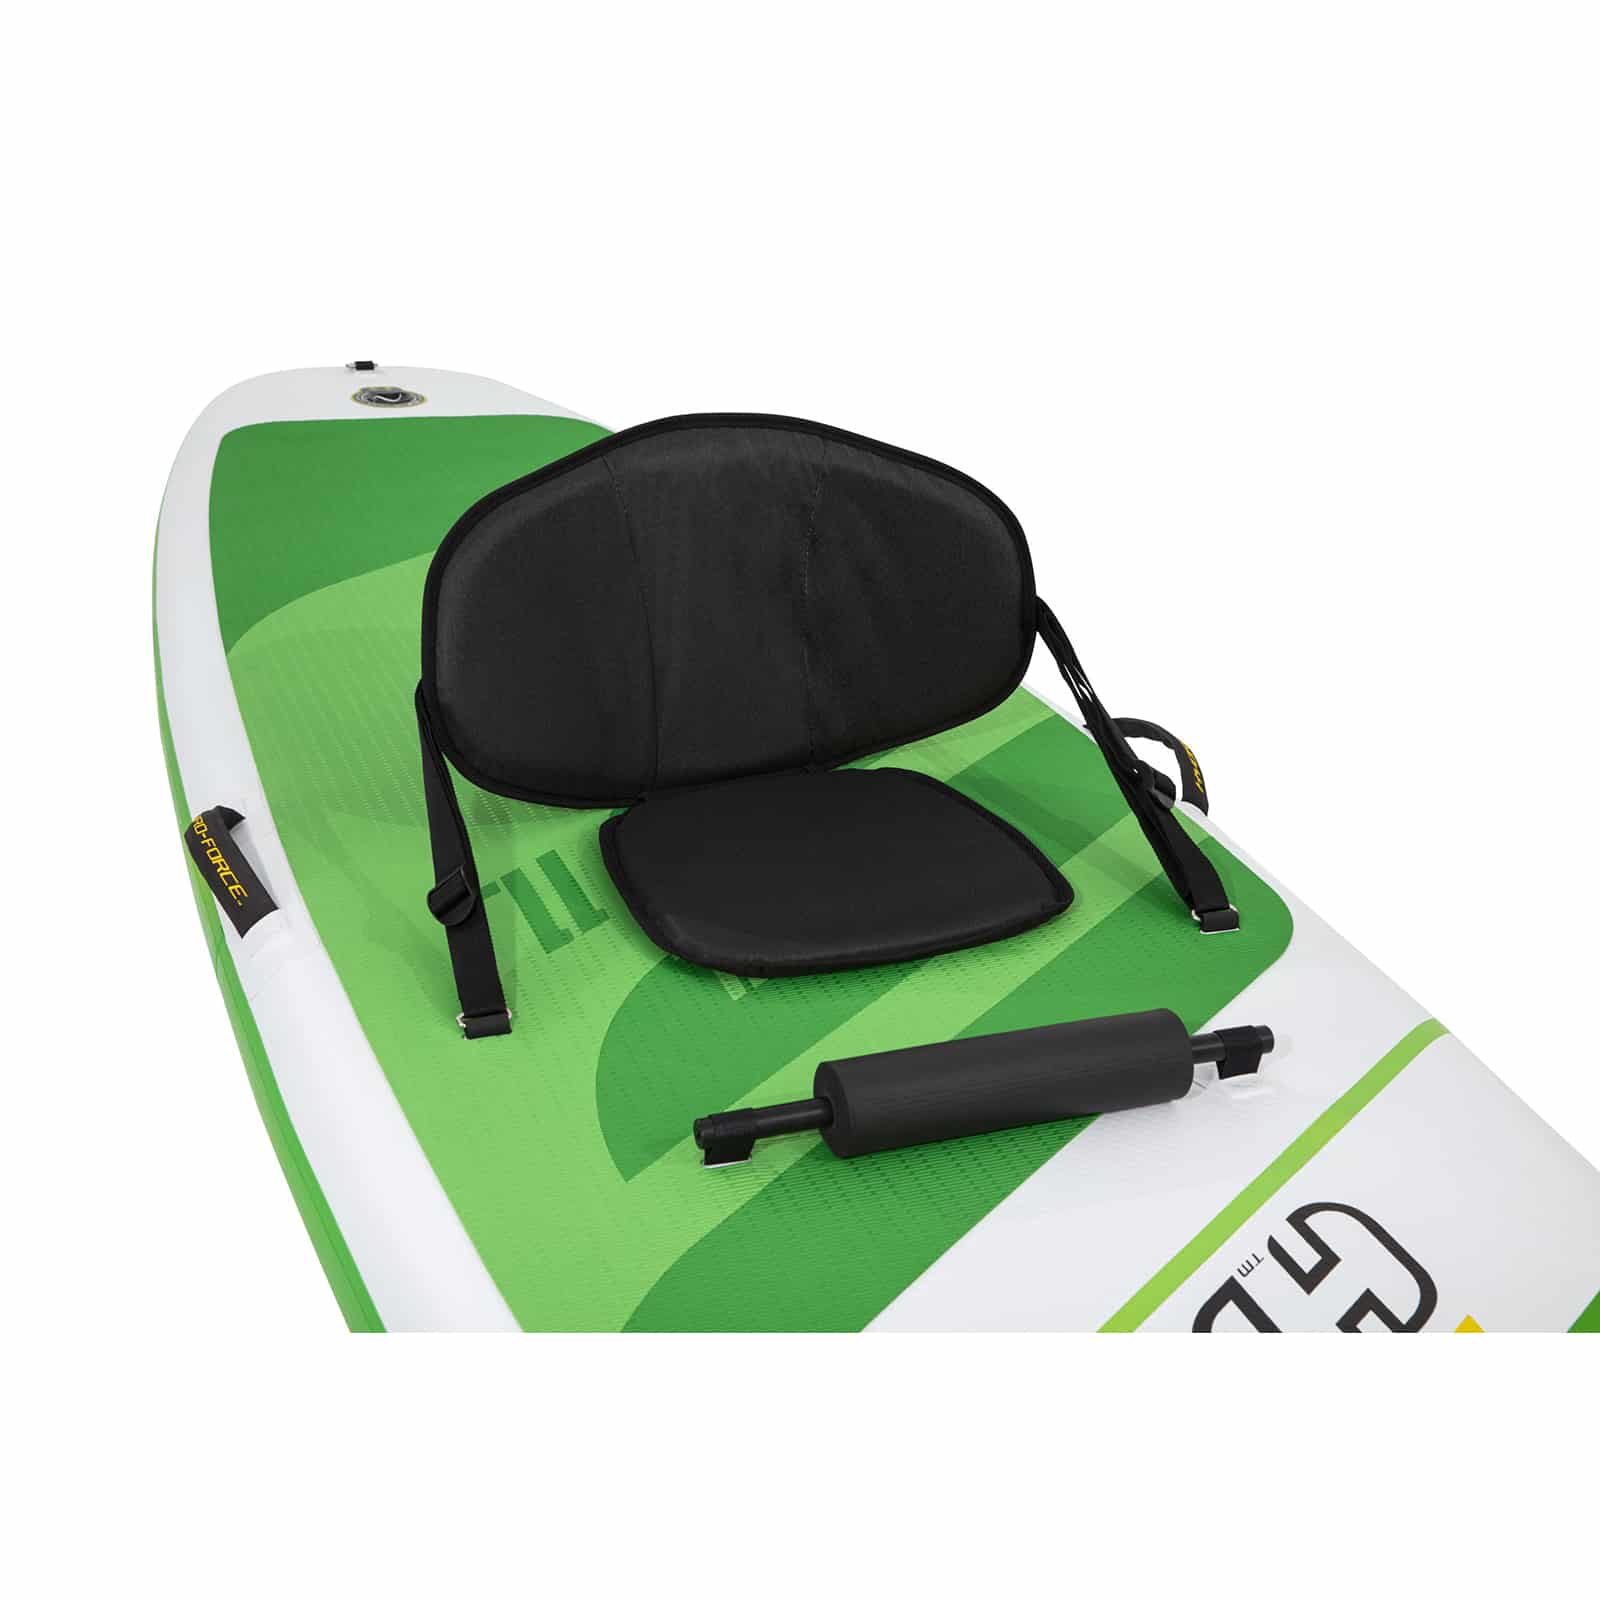 Tabla Paddle Surf Hinchable Bestway Hydro-force Freesoul Tech 340x89x15 Cm Con Remo, Asiento, Bomba